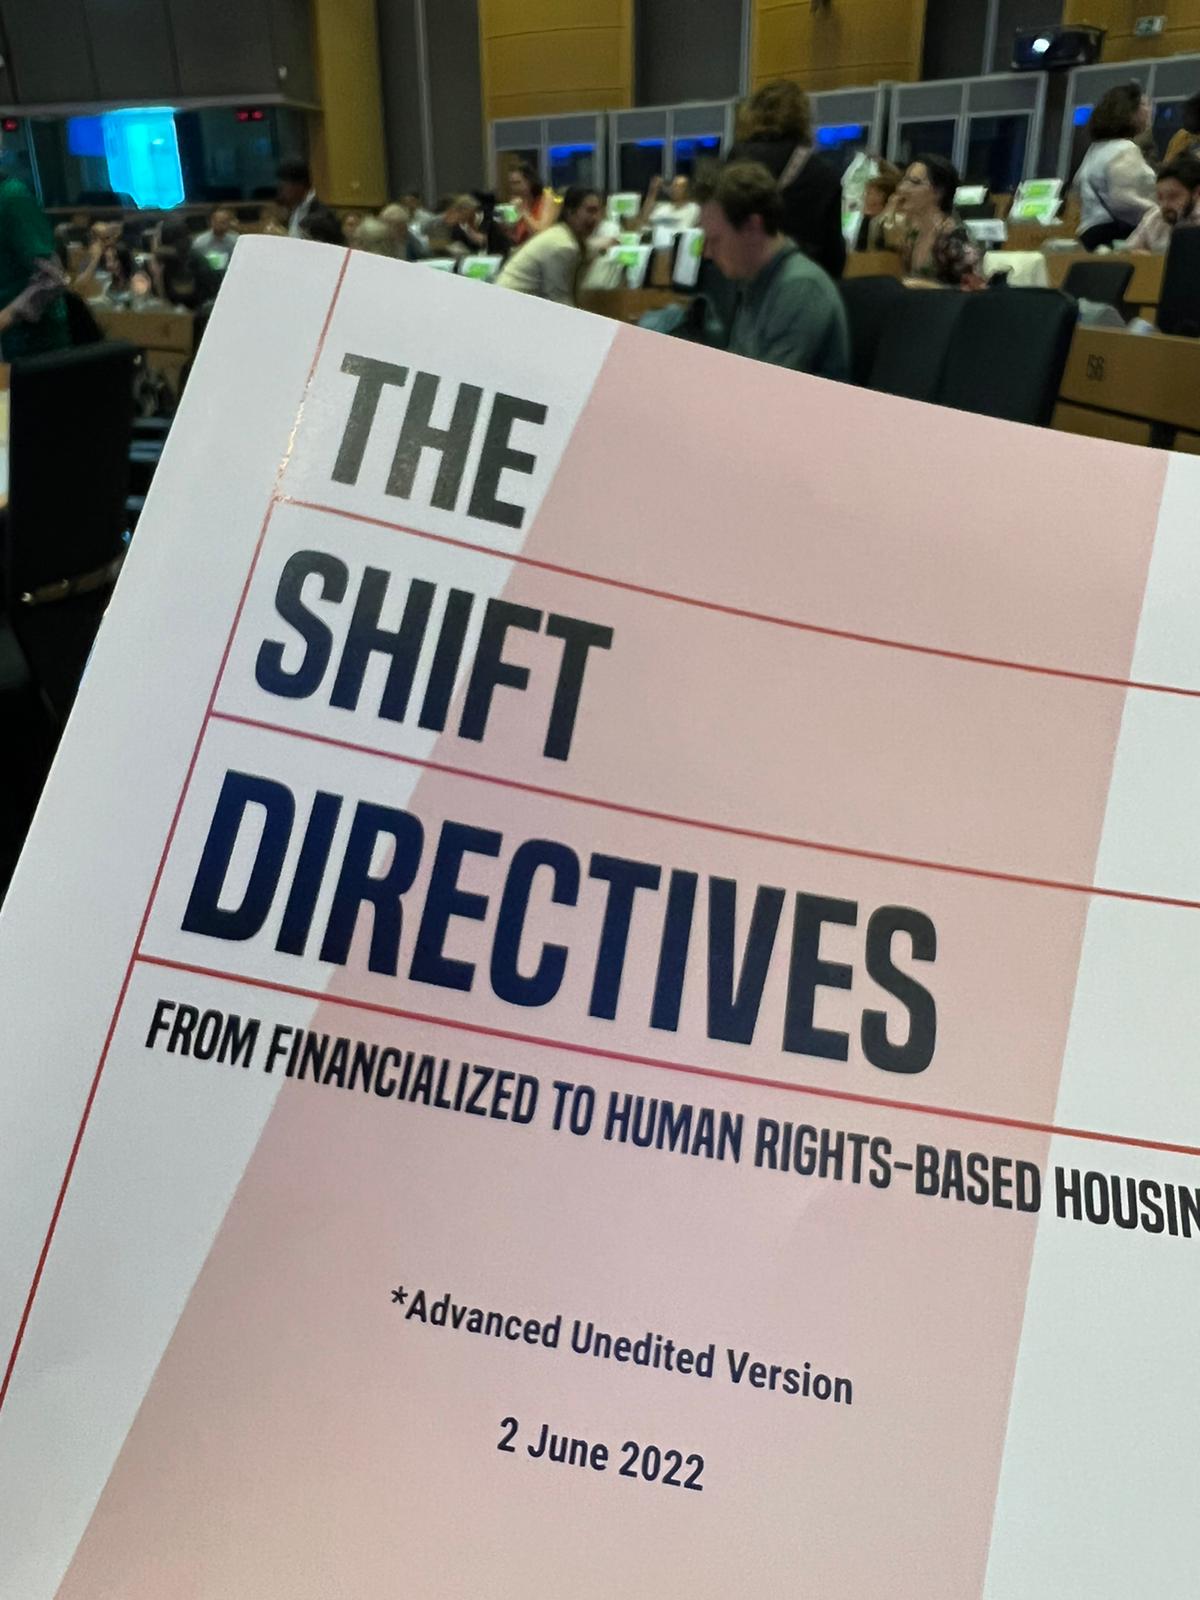 The Shift launches world’s first directives on financialized housing in European Parliament